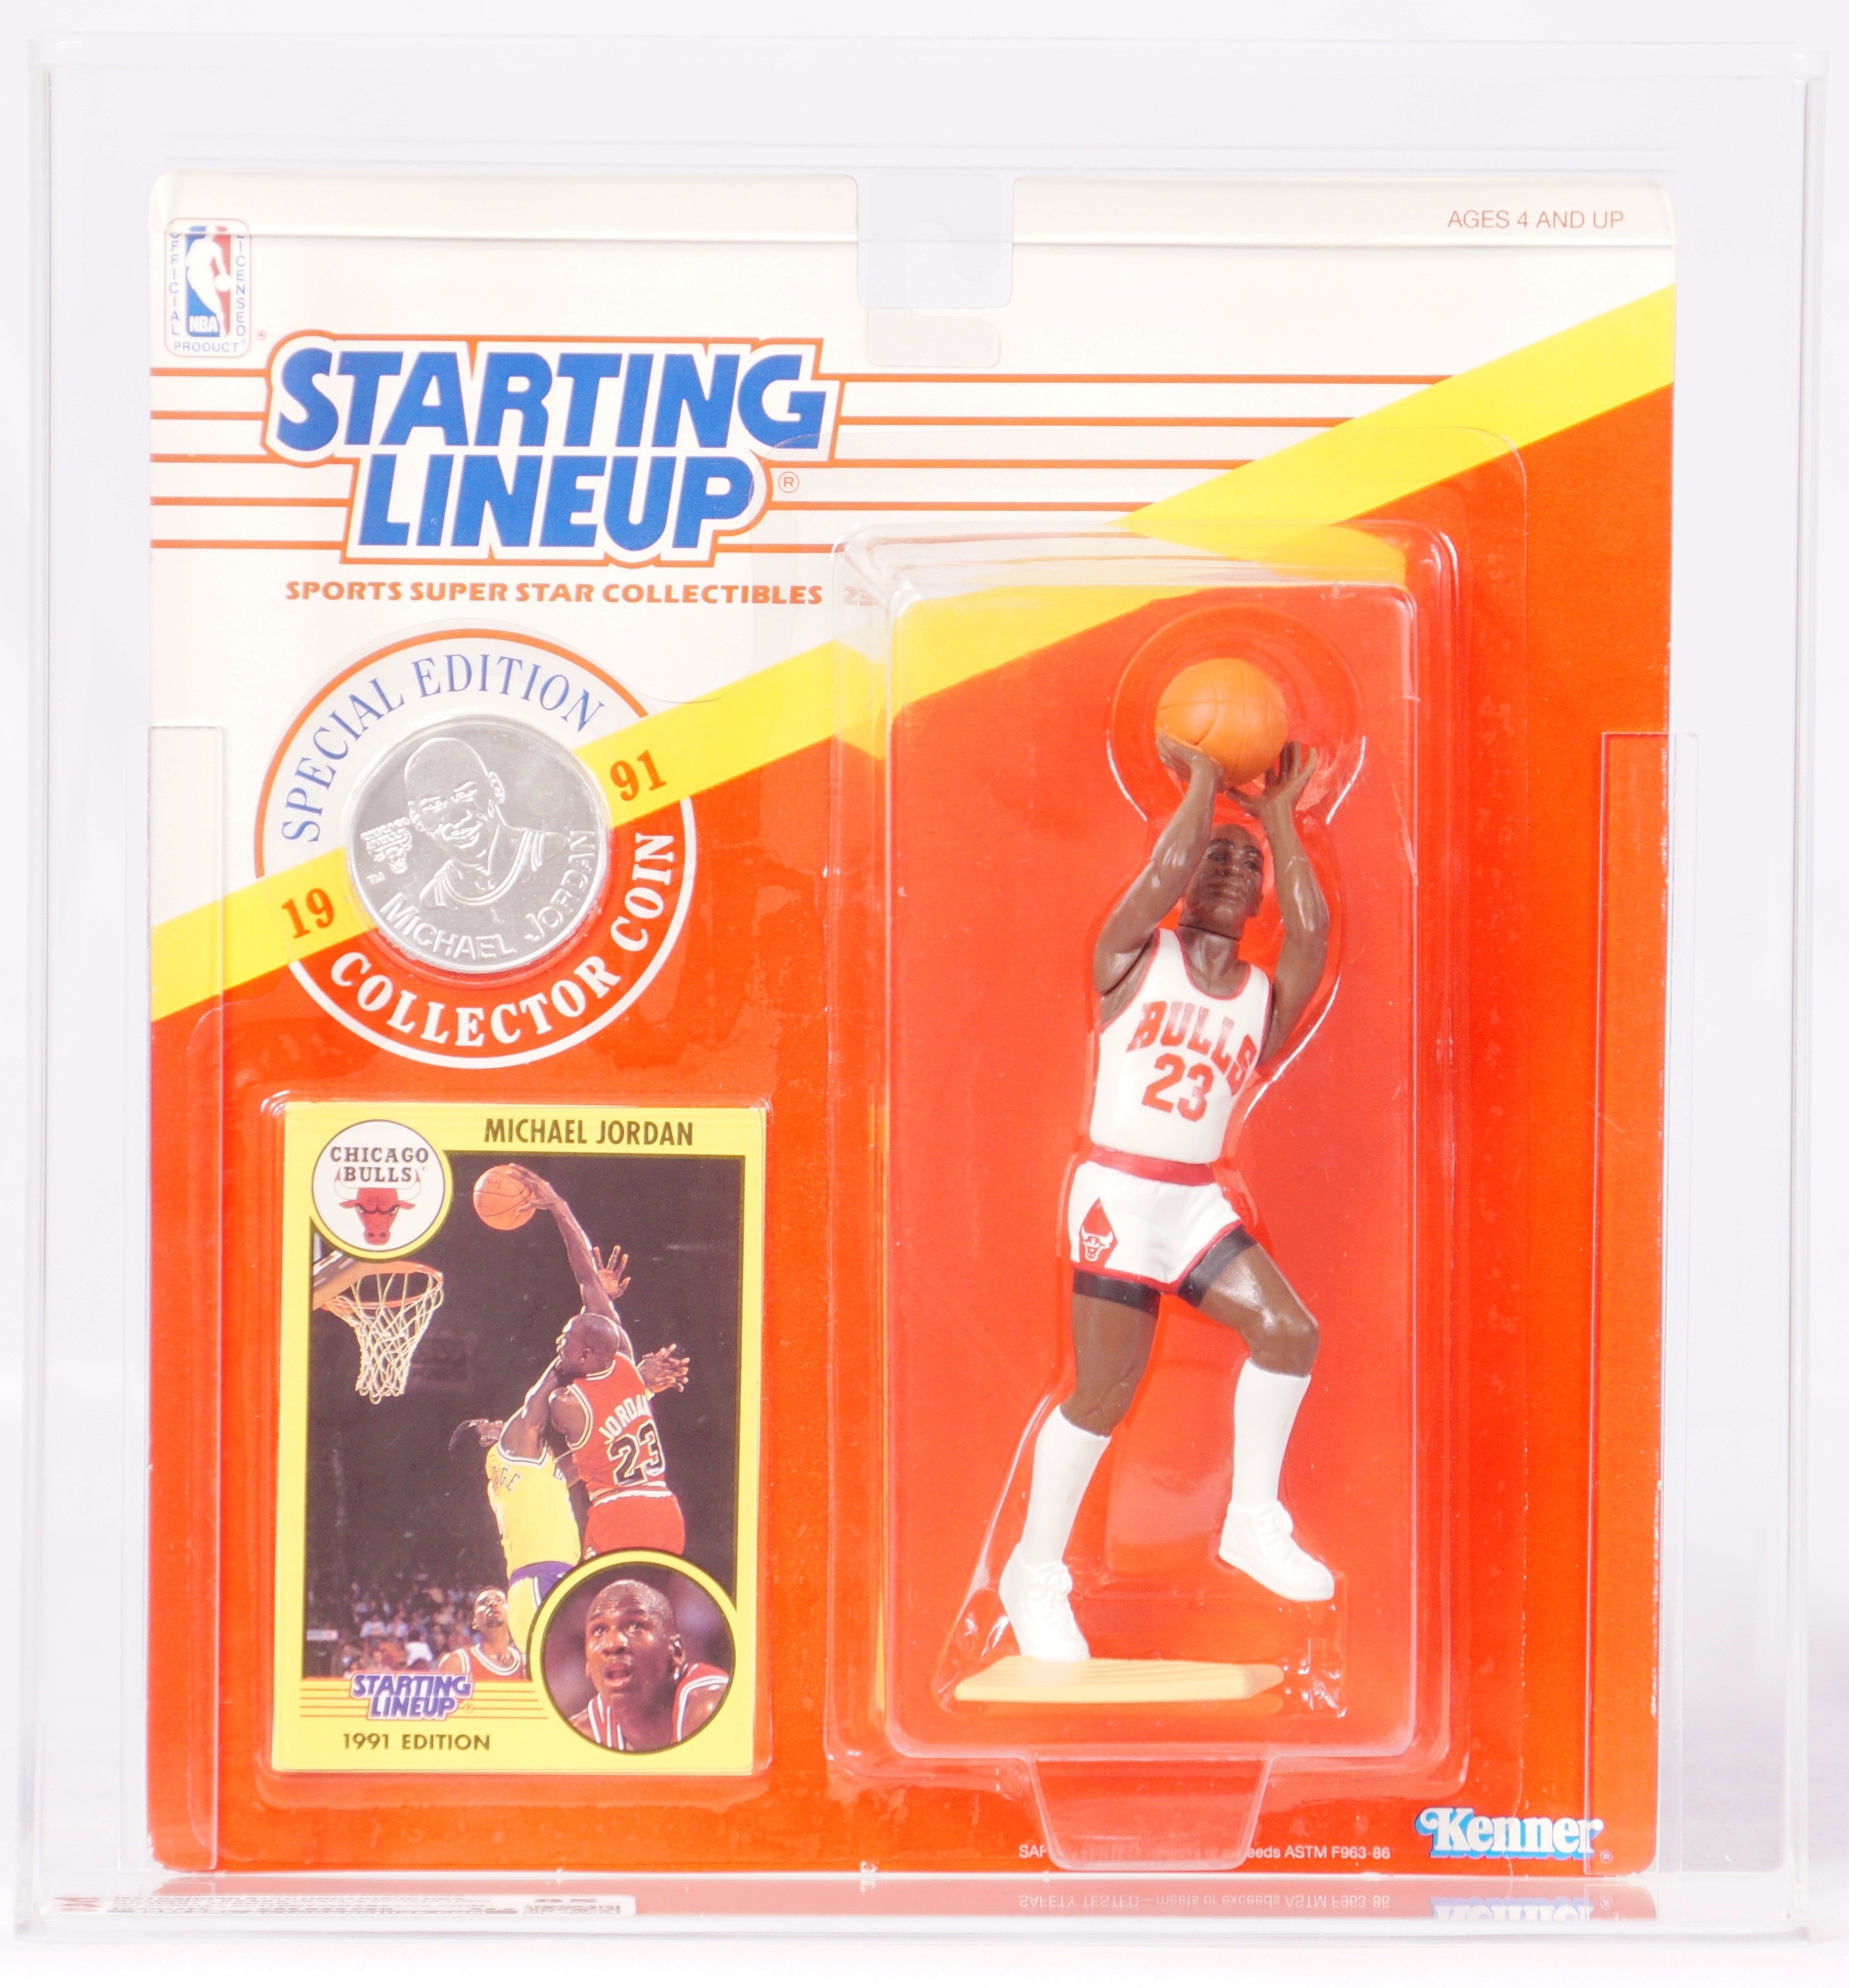 1991 Kenner Starting Lineup NBA Carded Sports Figure - Michael